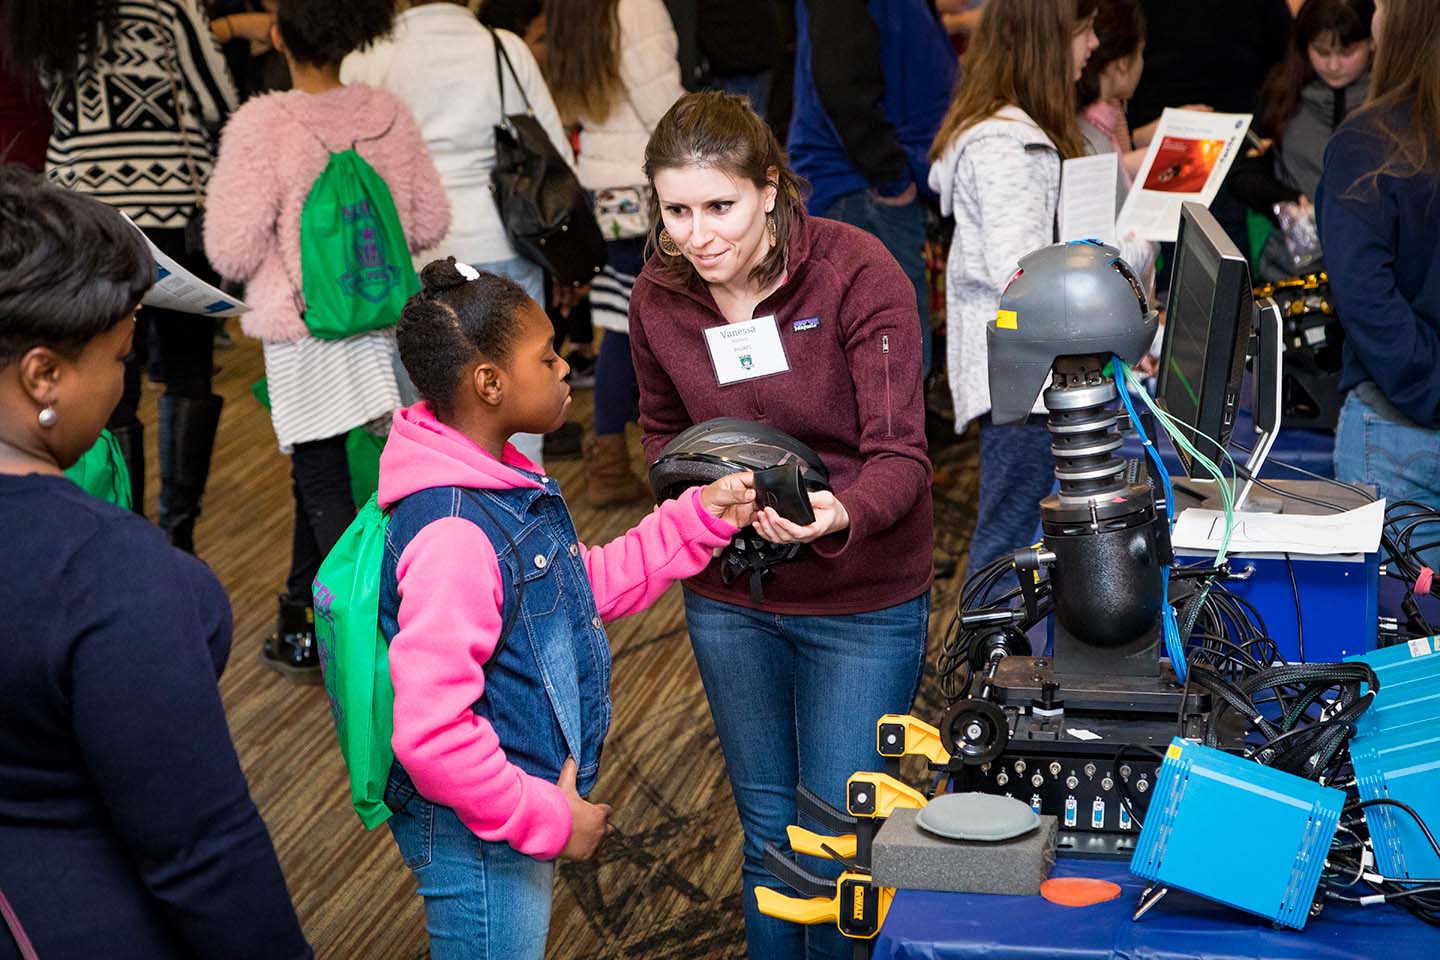 Girl Power 2018 attendee participated in a biomechanics demonstration